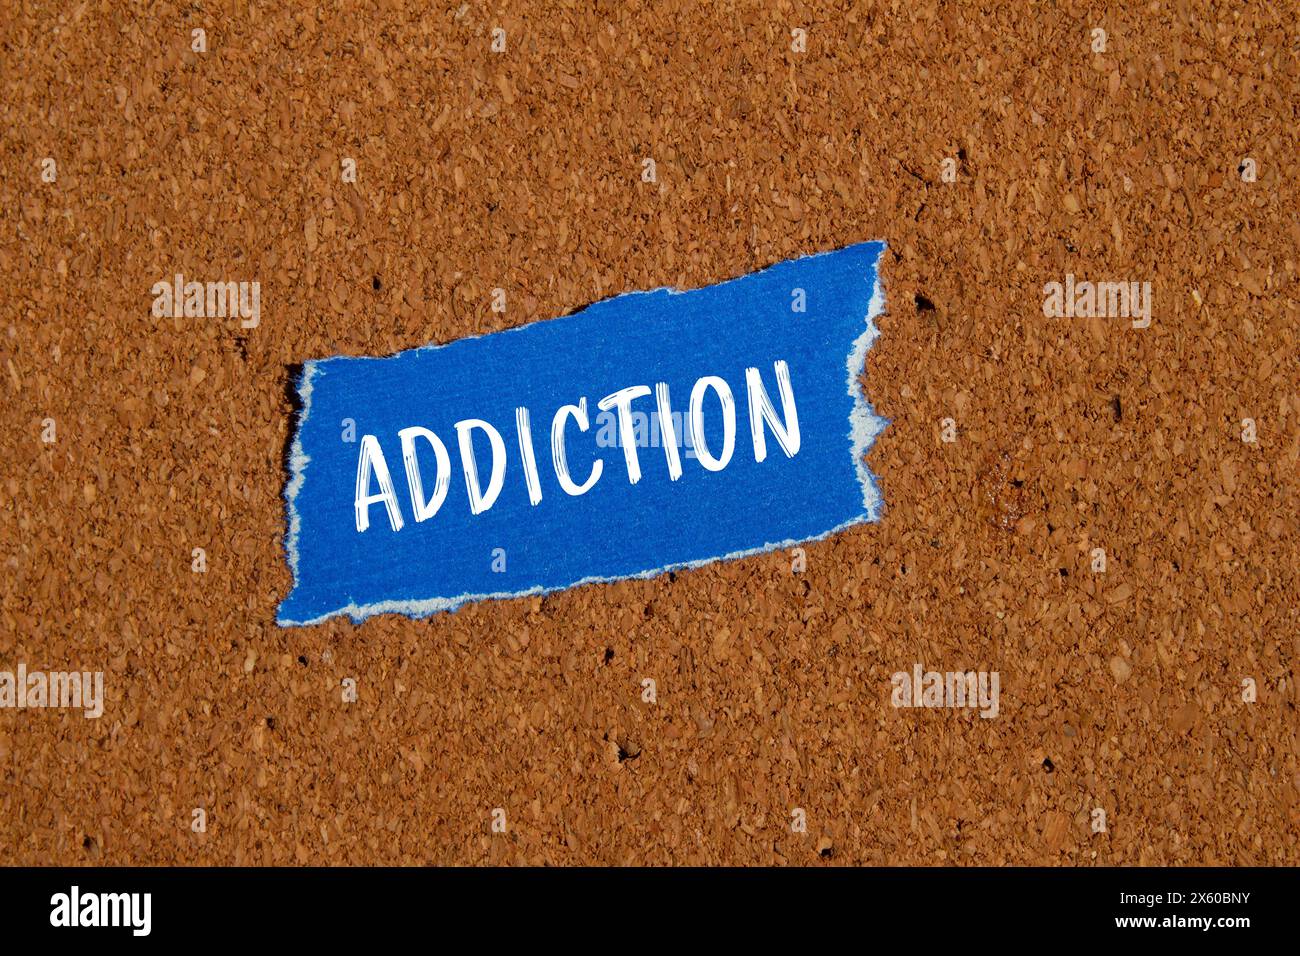 Addiction word written on ripped blue paper piece with brown background. Conceptual addiction symbol. Copy space. Stock Photo